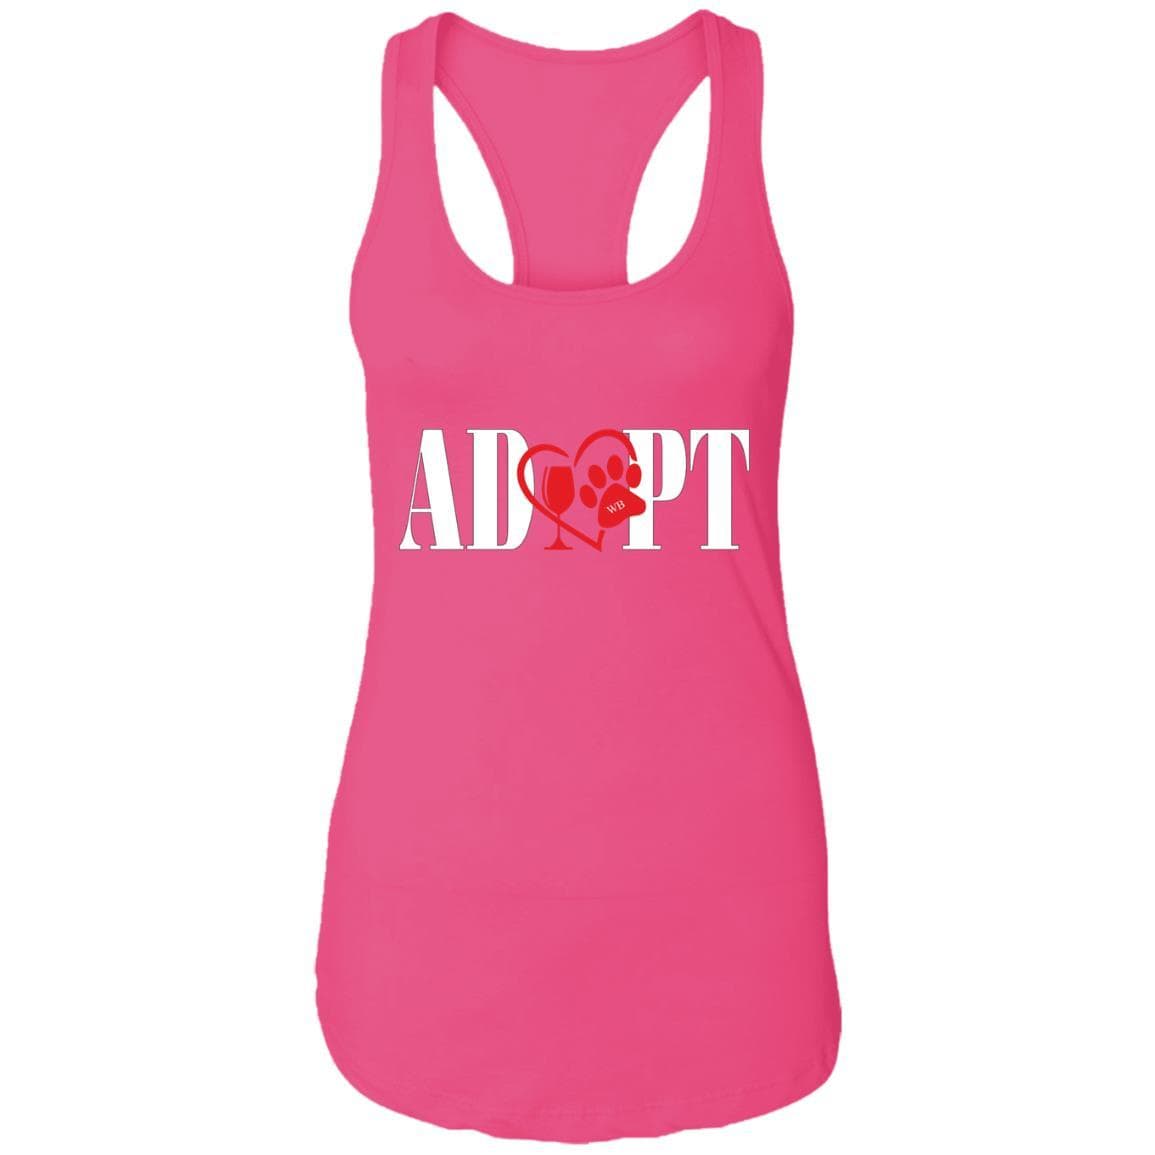 T-Shirts Raspberry / X-Small WineyBitches.Co “Adopt” Ladies Ideal Racerback Tank-Red Heart - Wht Lettering WineyBitchesCo